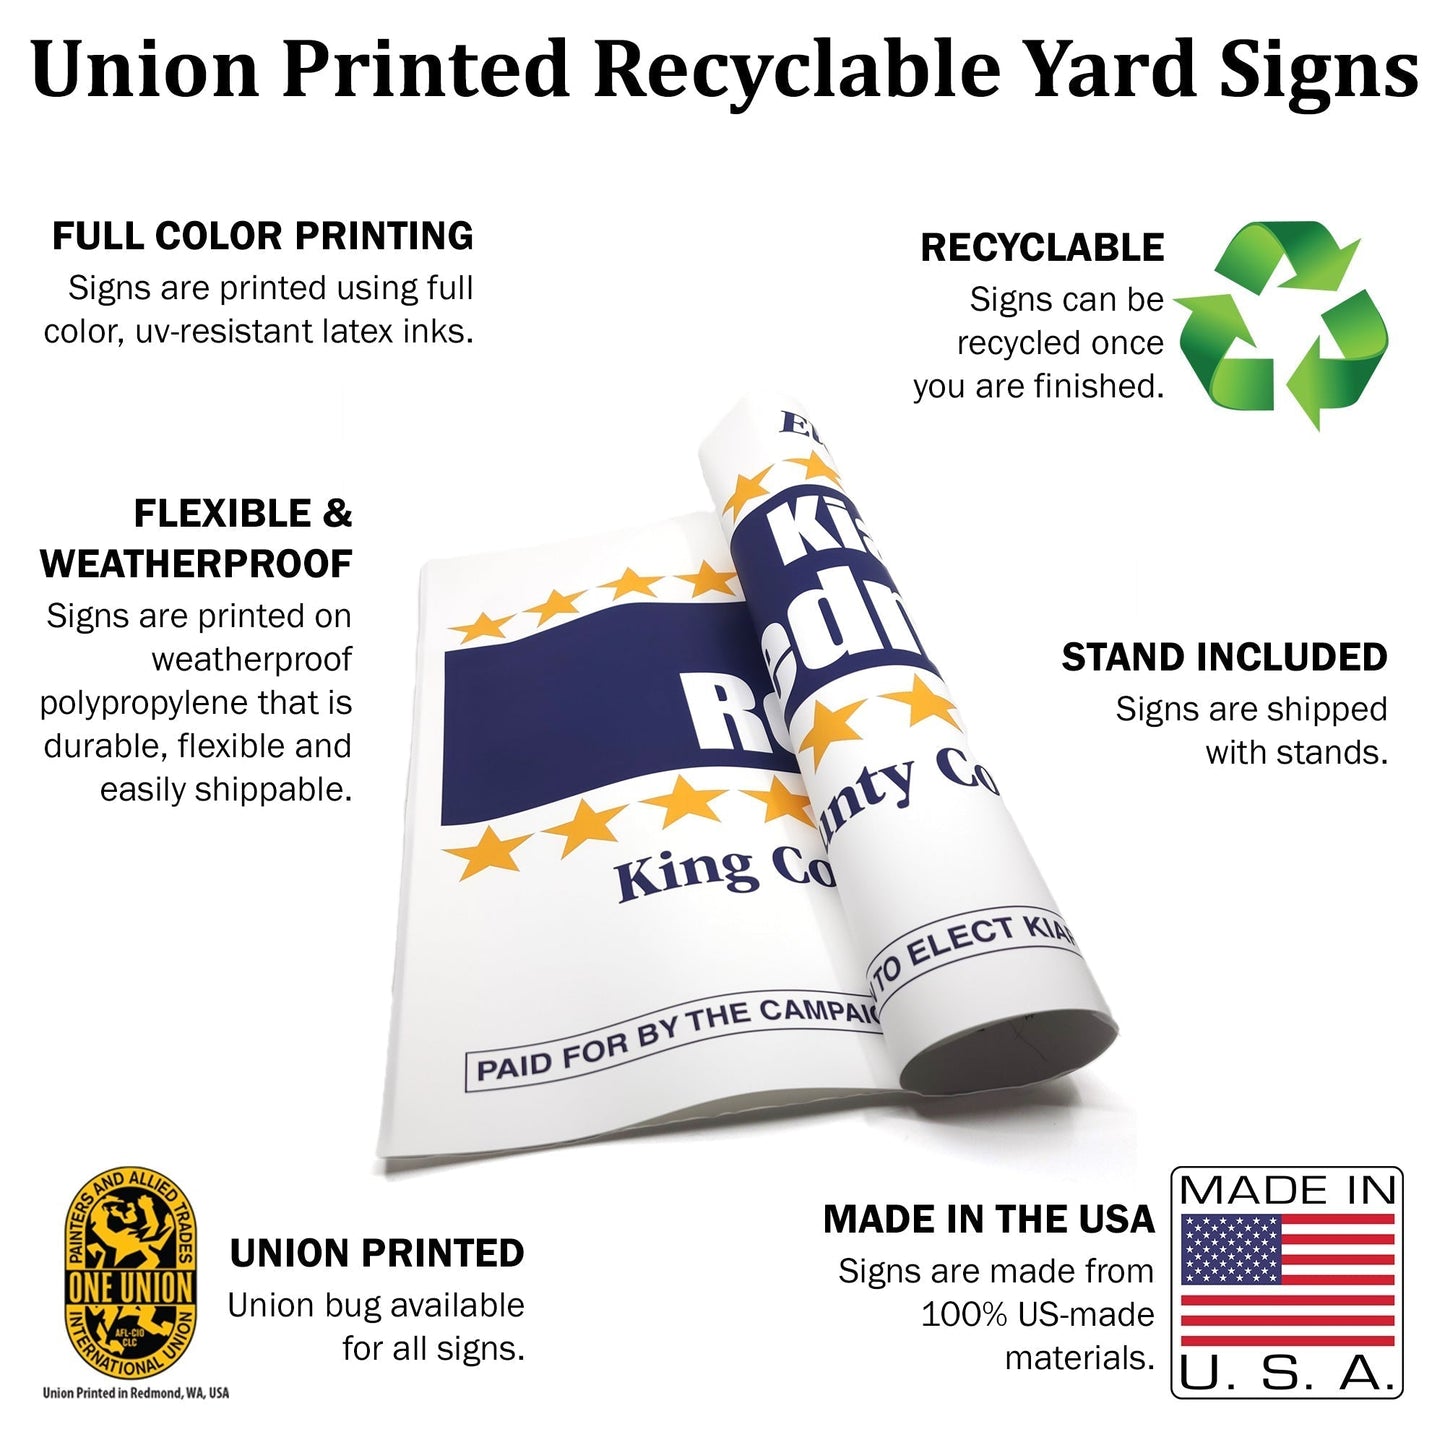 MerchBlue Union-Printed Yard Sign - 24x18 - Eco design - Recyclable - Made in the USA